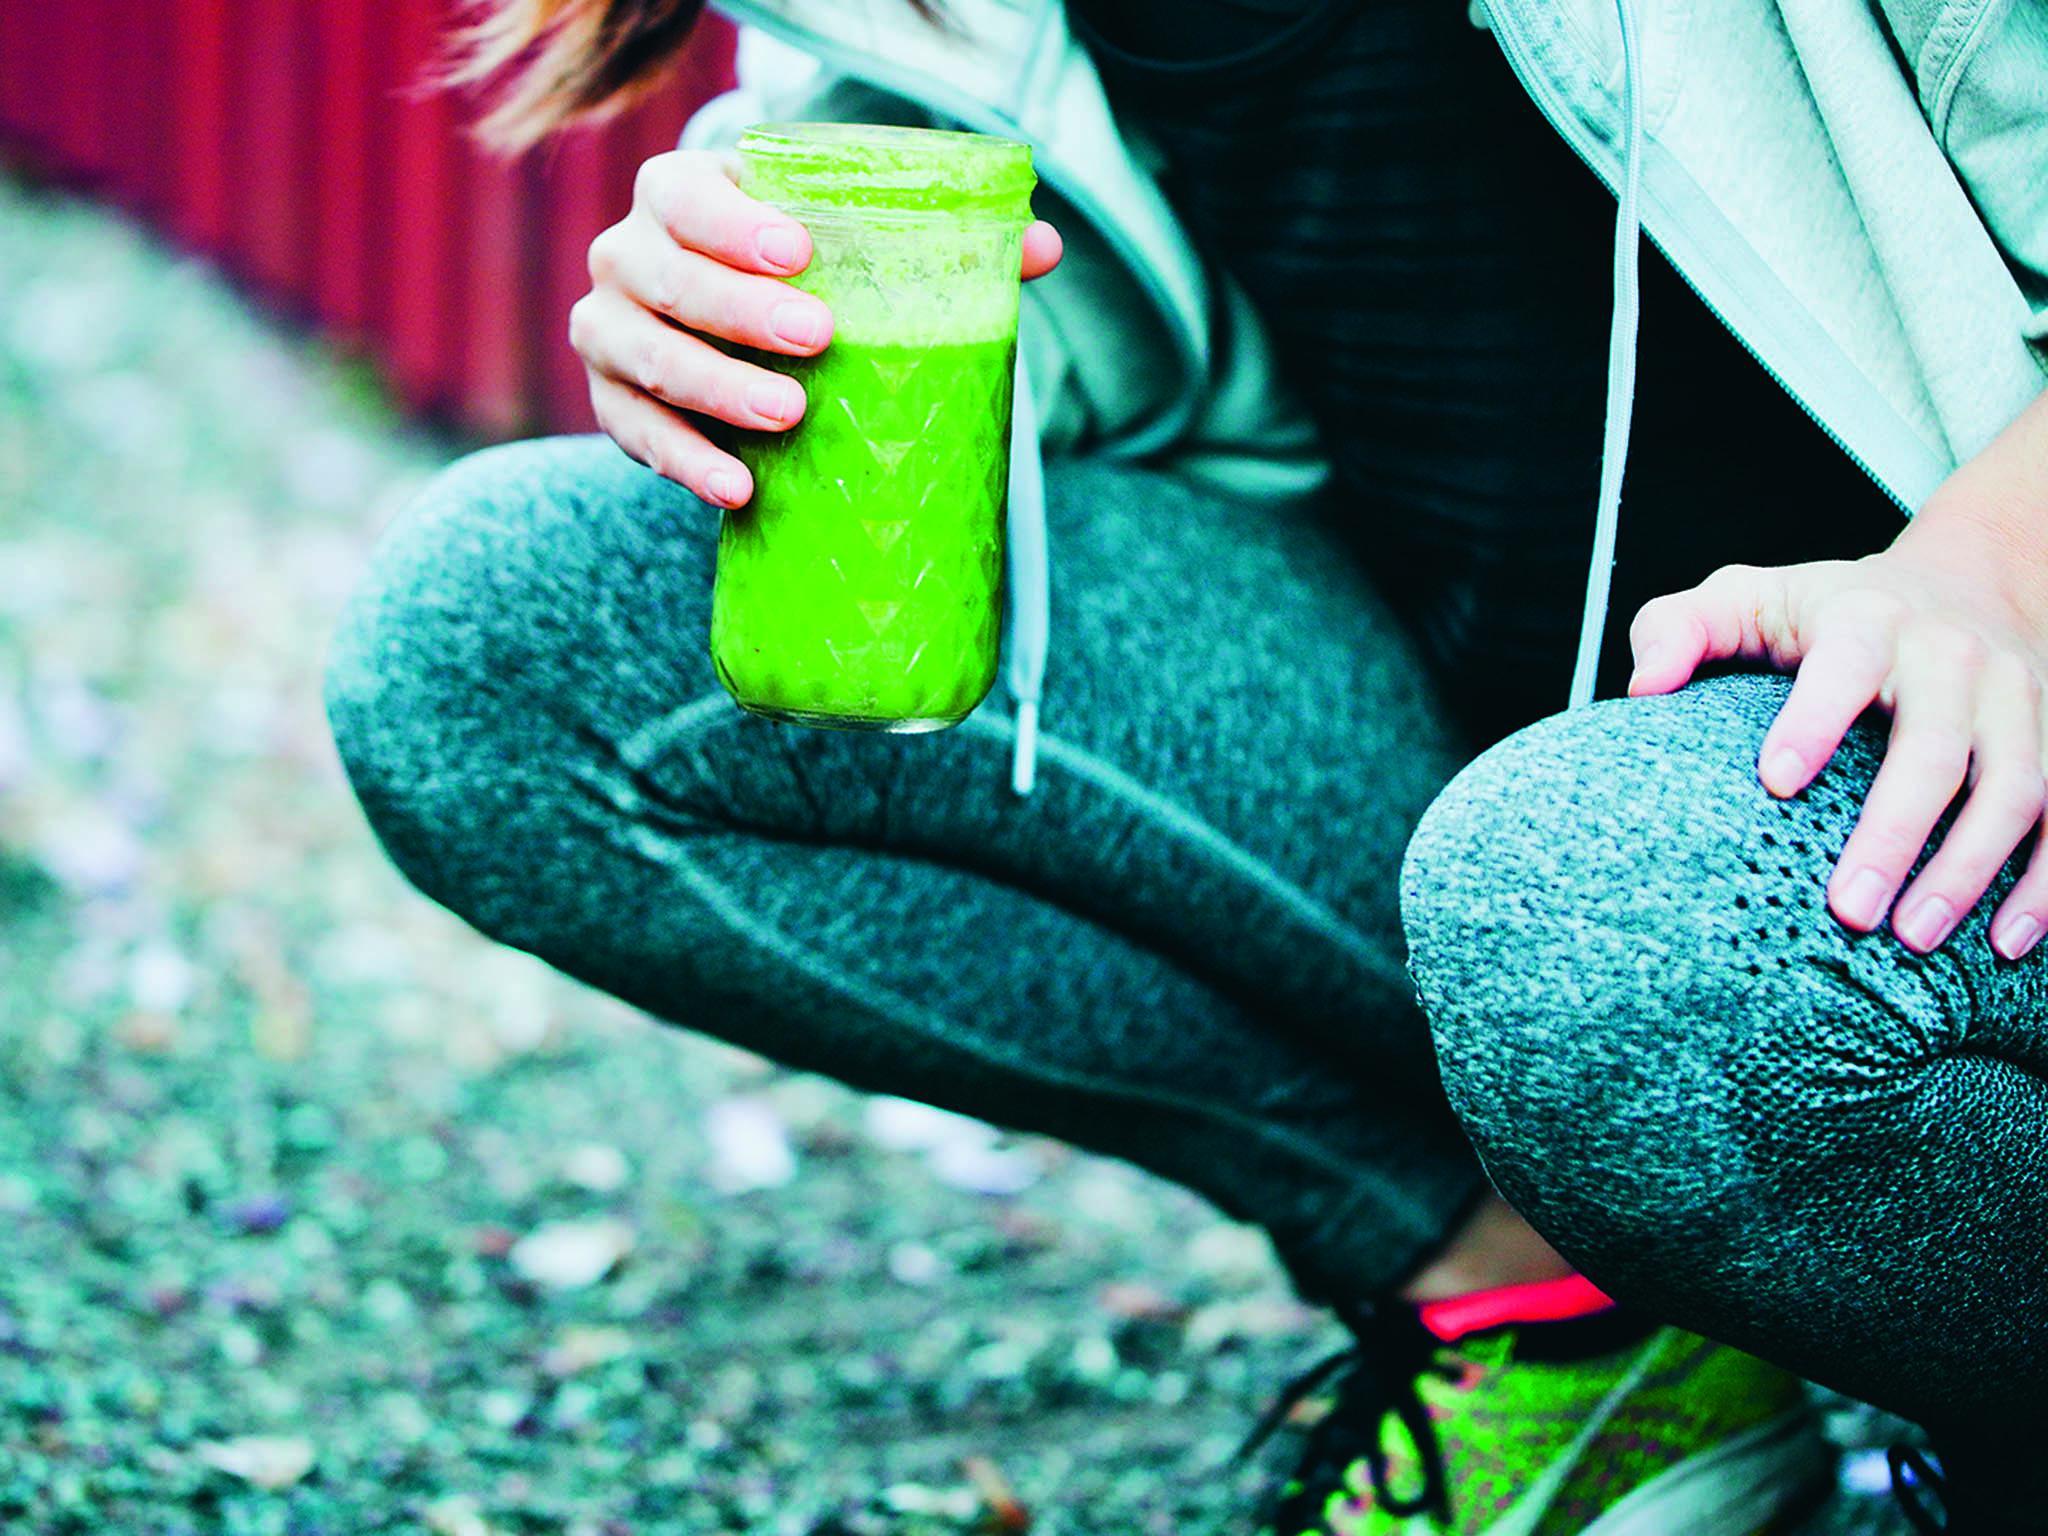 The green rehydration smoothie helps regain electrolytes which are lost when you sweat